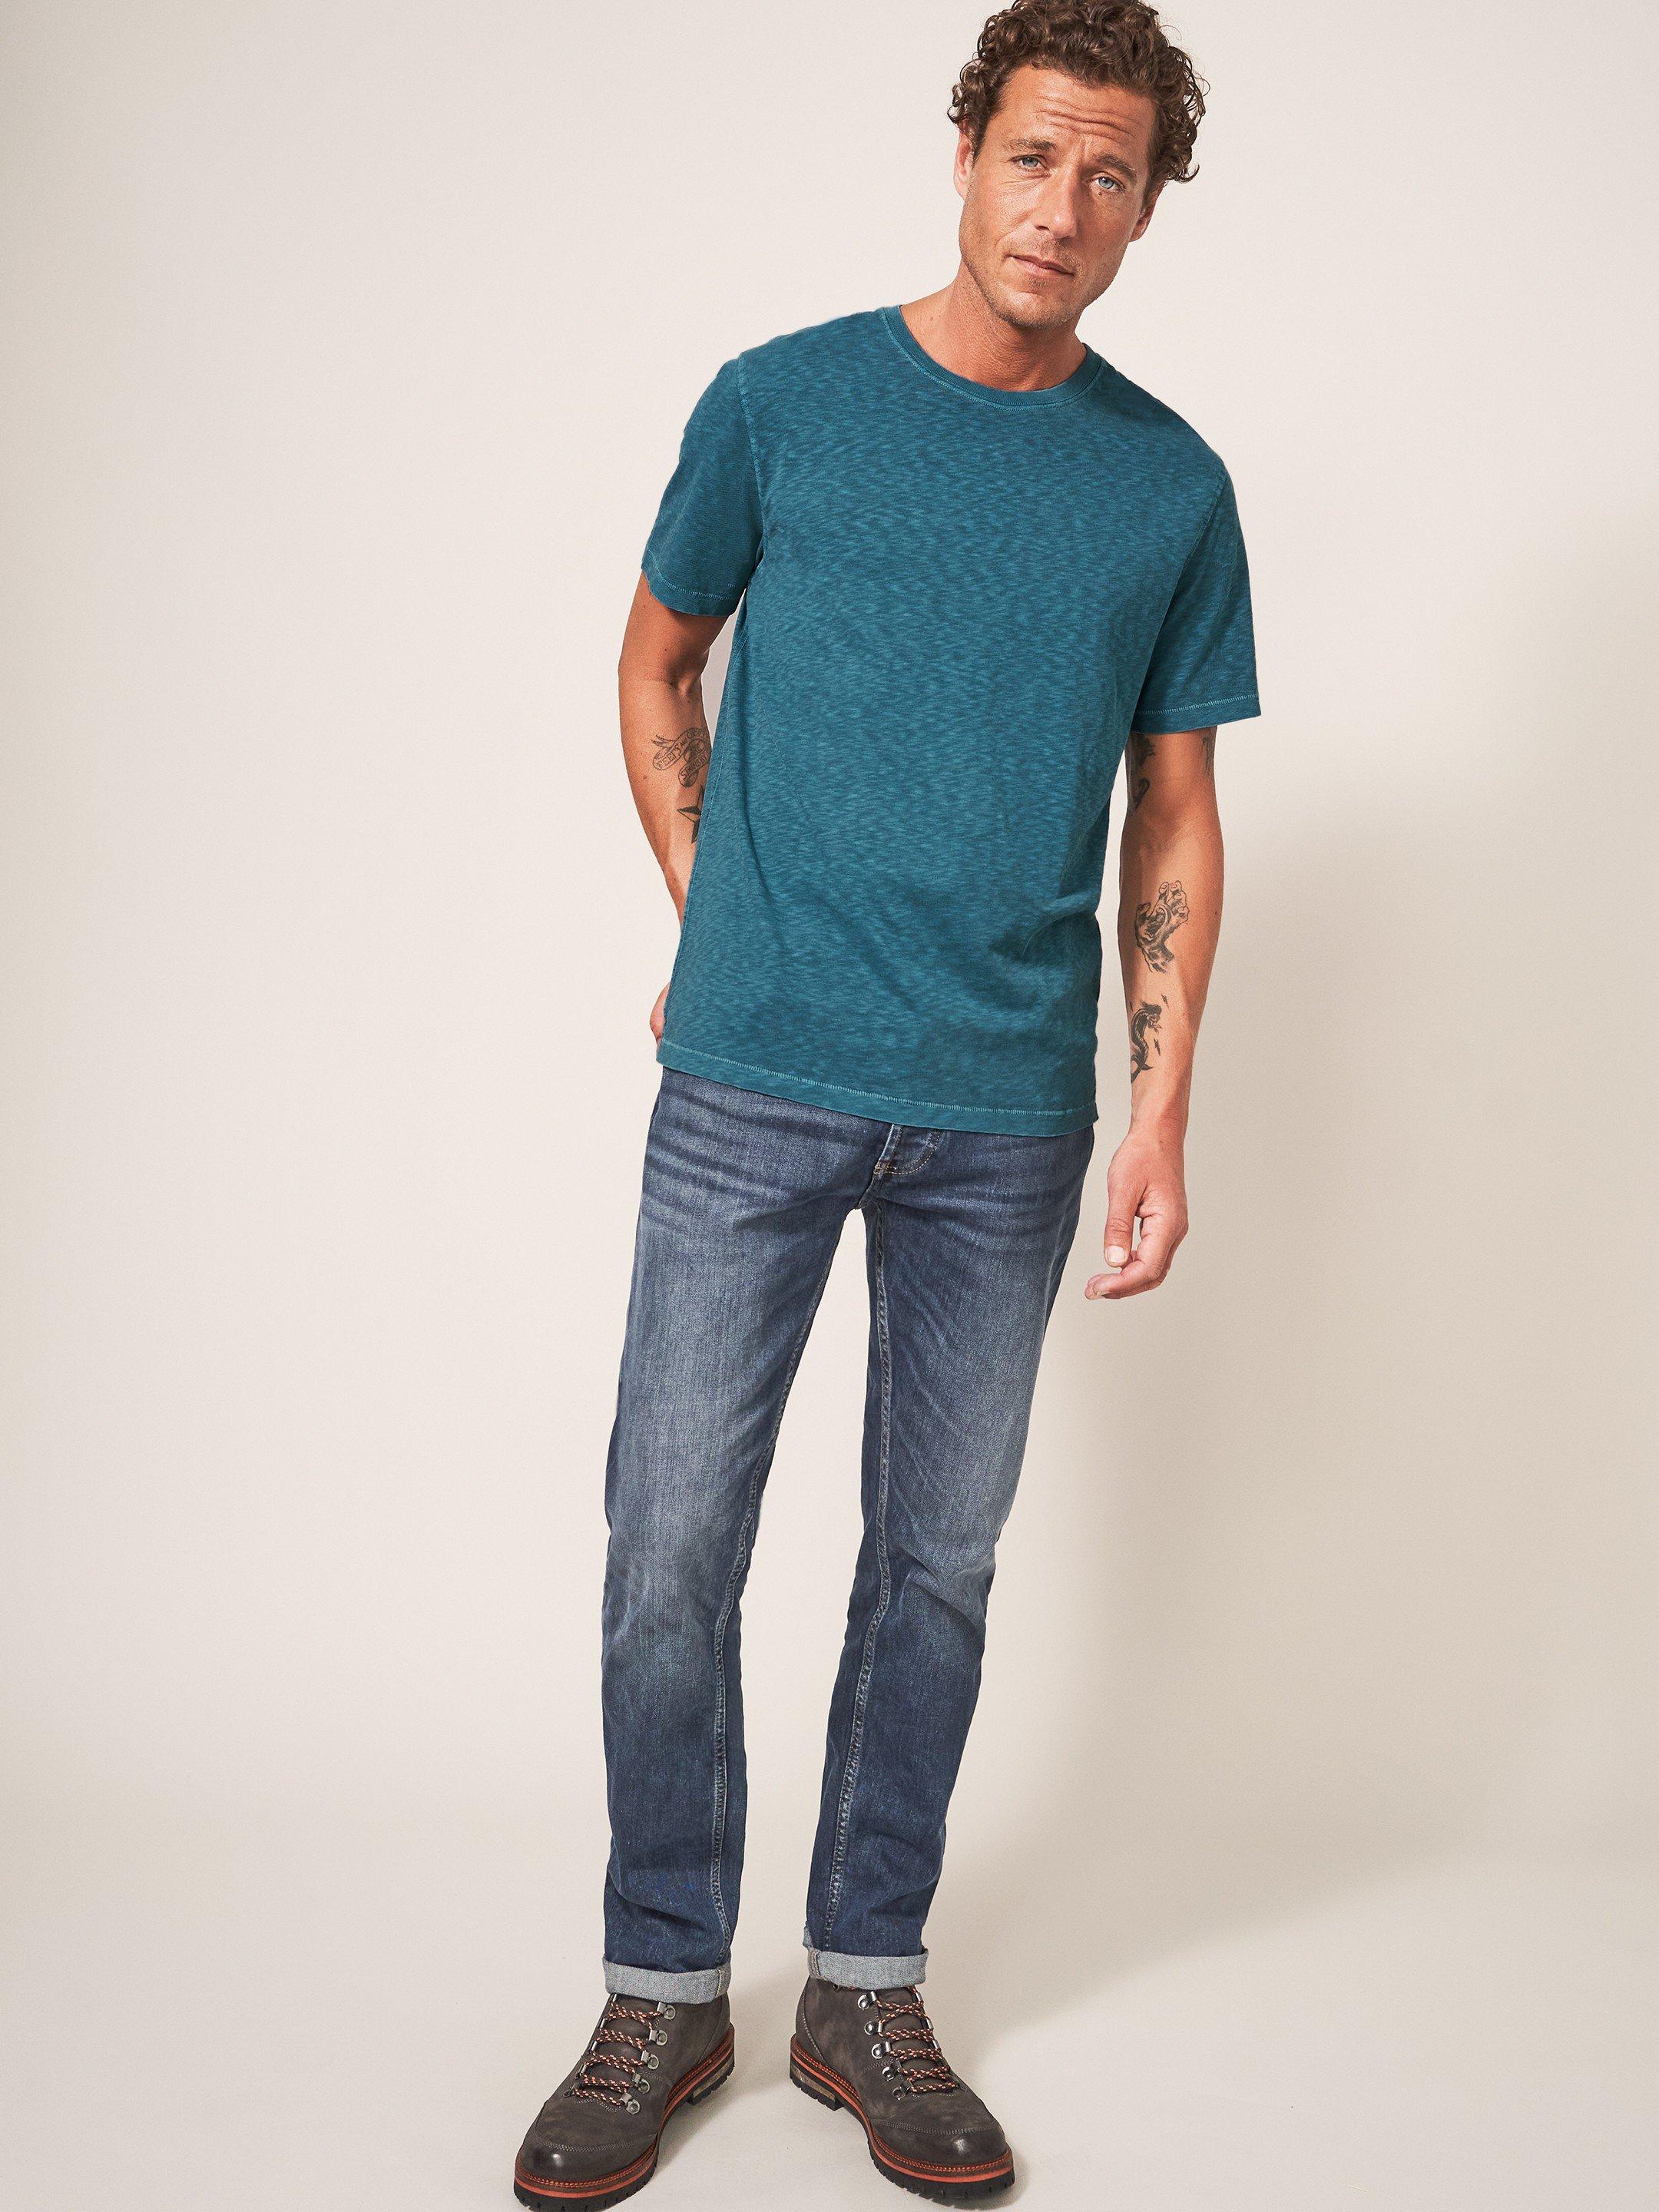 Abersoch Short Sleeve Tee in MID TEAL - MODEL FRONT